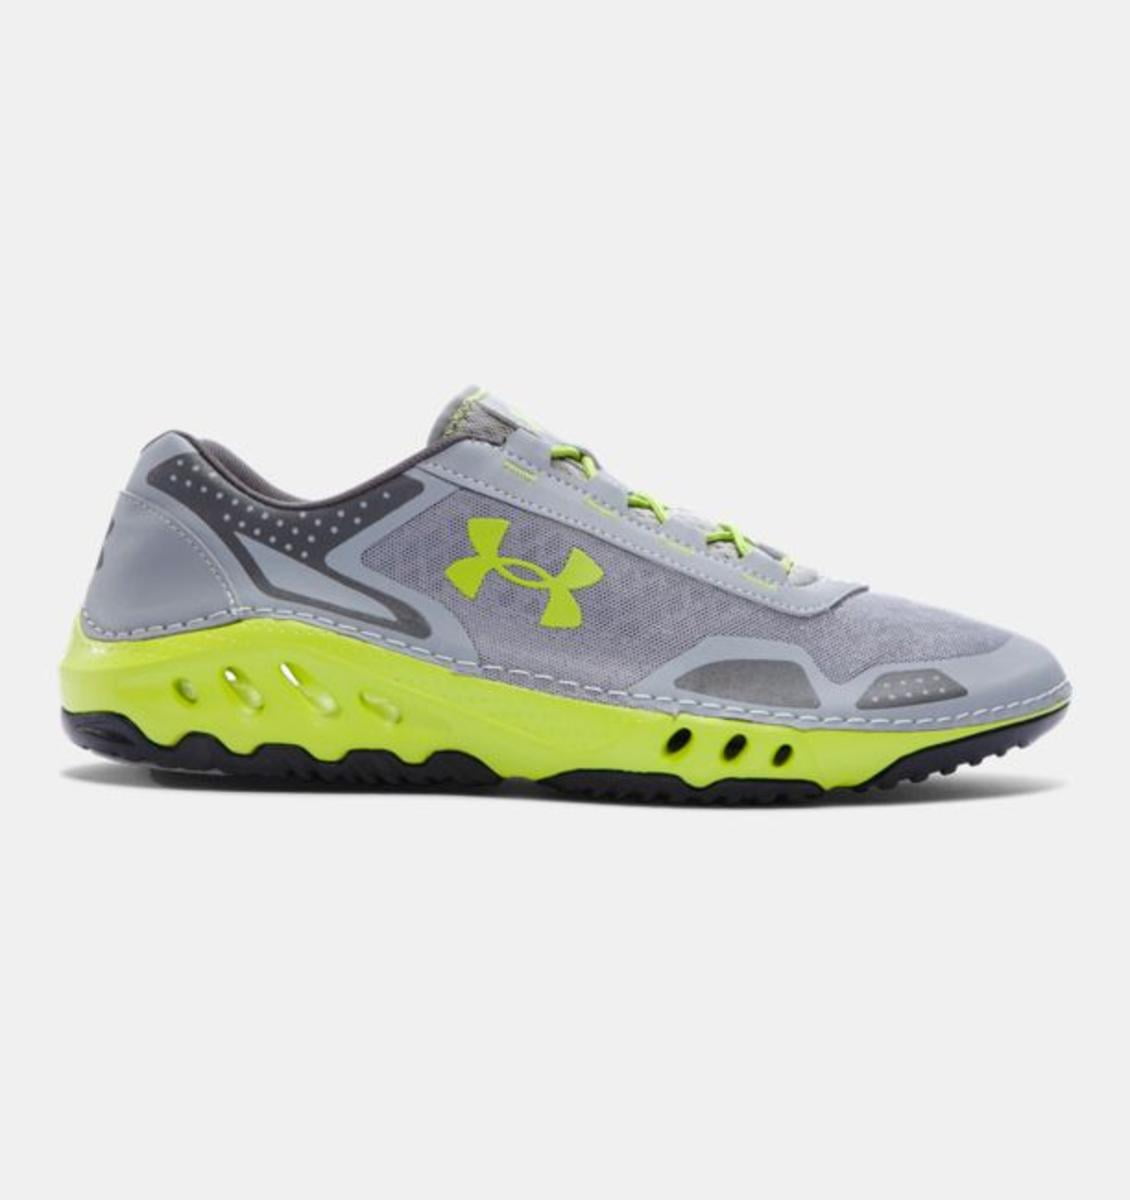 Under Armour Drainster 1268868-001 Men's Fishing Shoes - Size 10